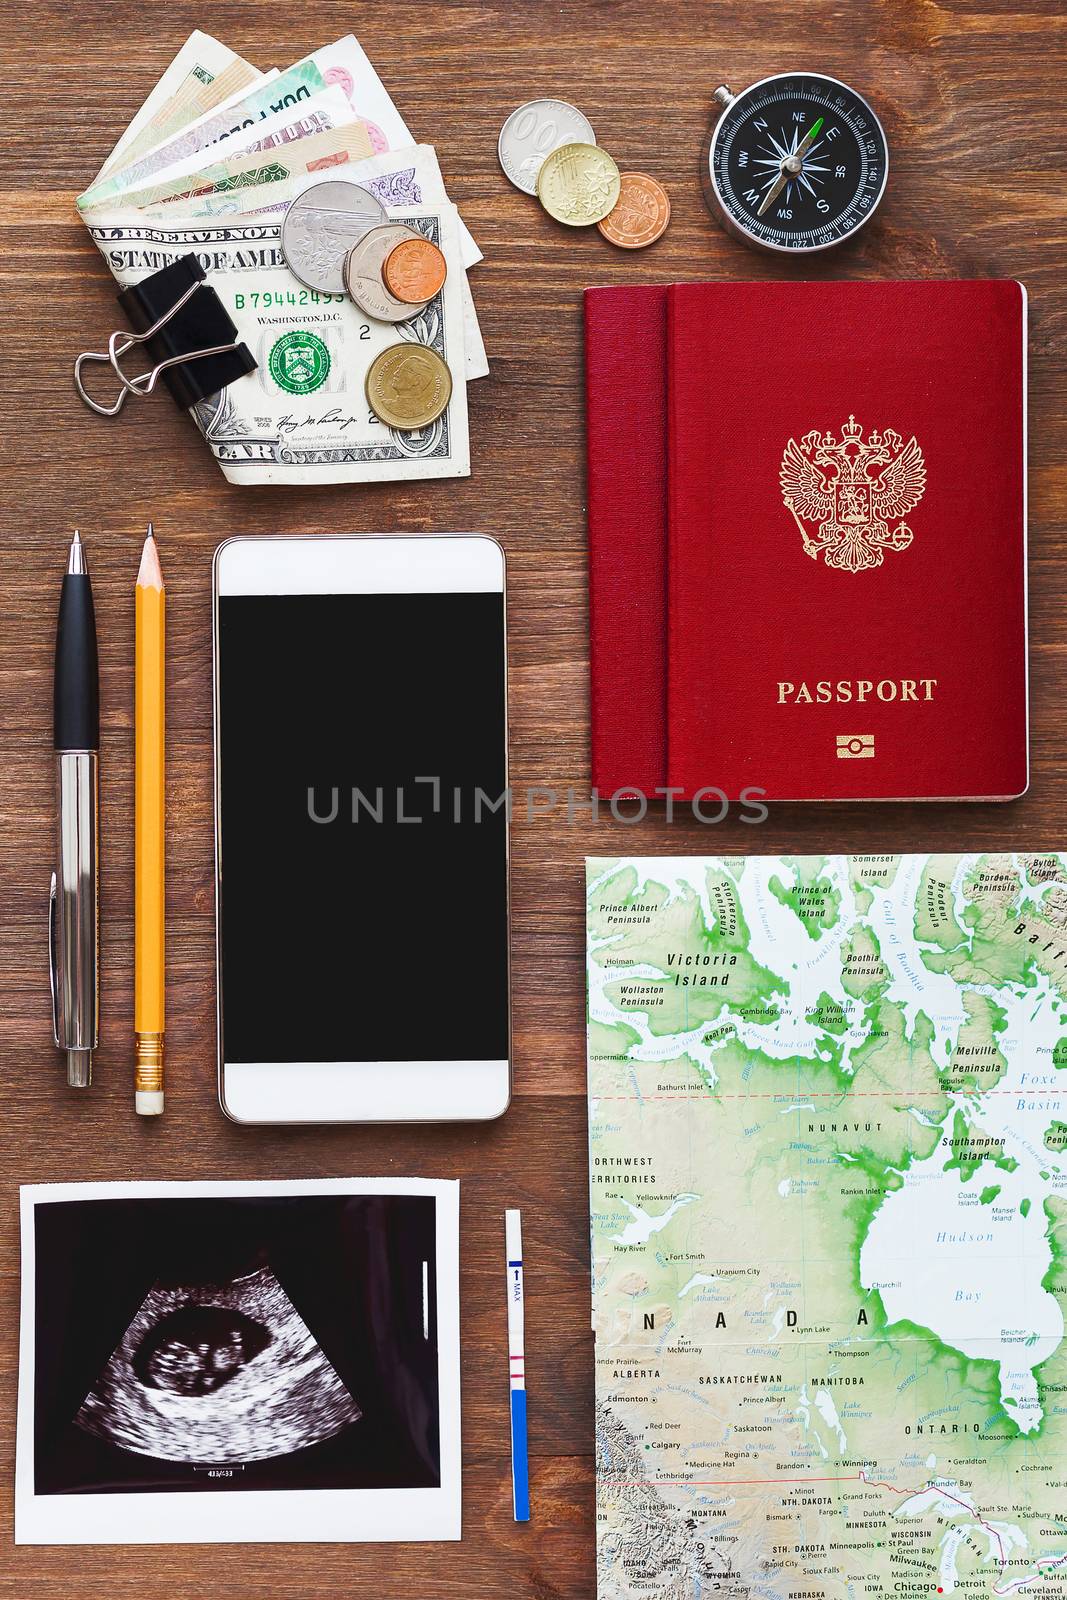 Travel while being pregnant background. Different things you need for journey - smartphone, passport, map, money. Ultrasound photo of baby and positive pregnancy test.